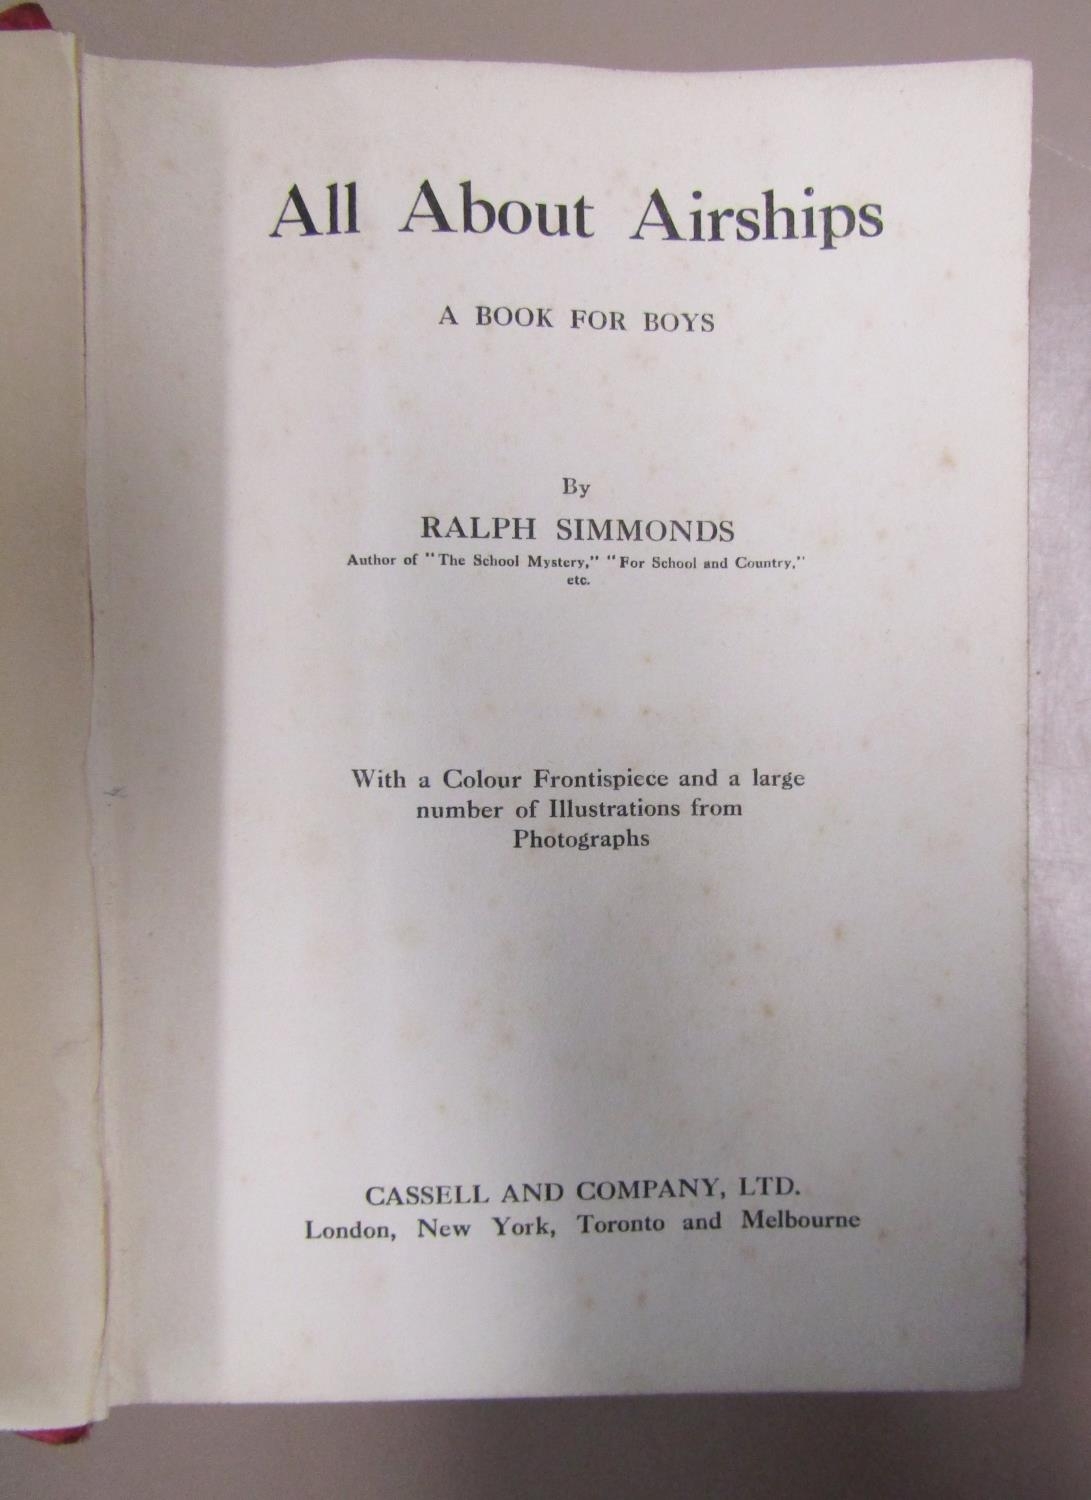 Edwardian boy's books with decorated spines including All About Airships by Ralph Simmonds 1918 - Image 3 of 4